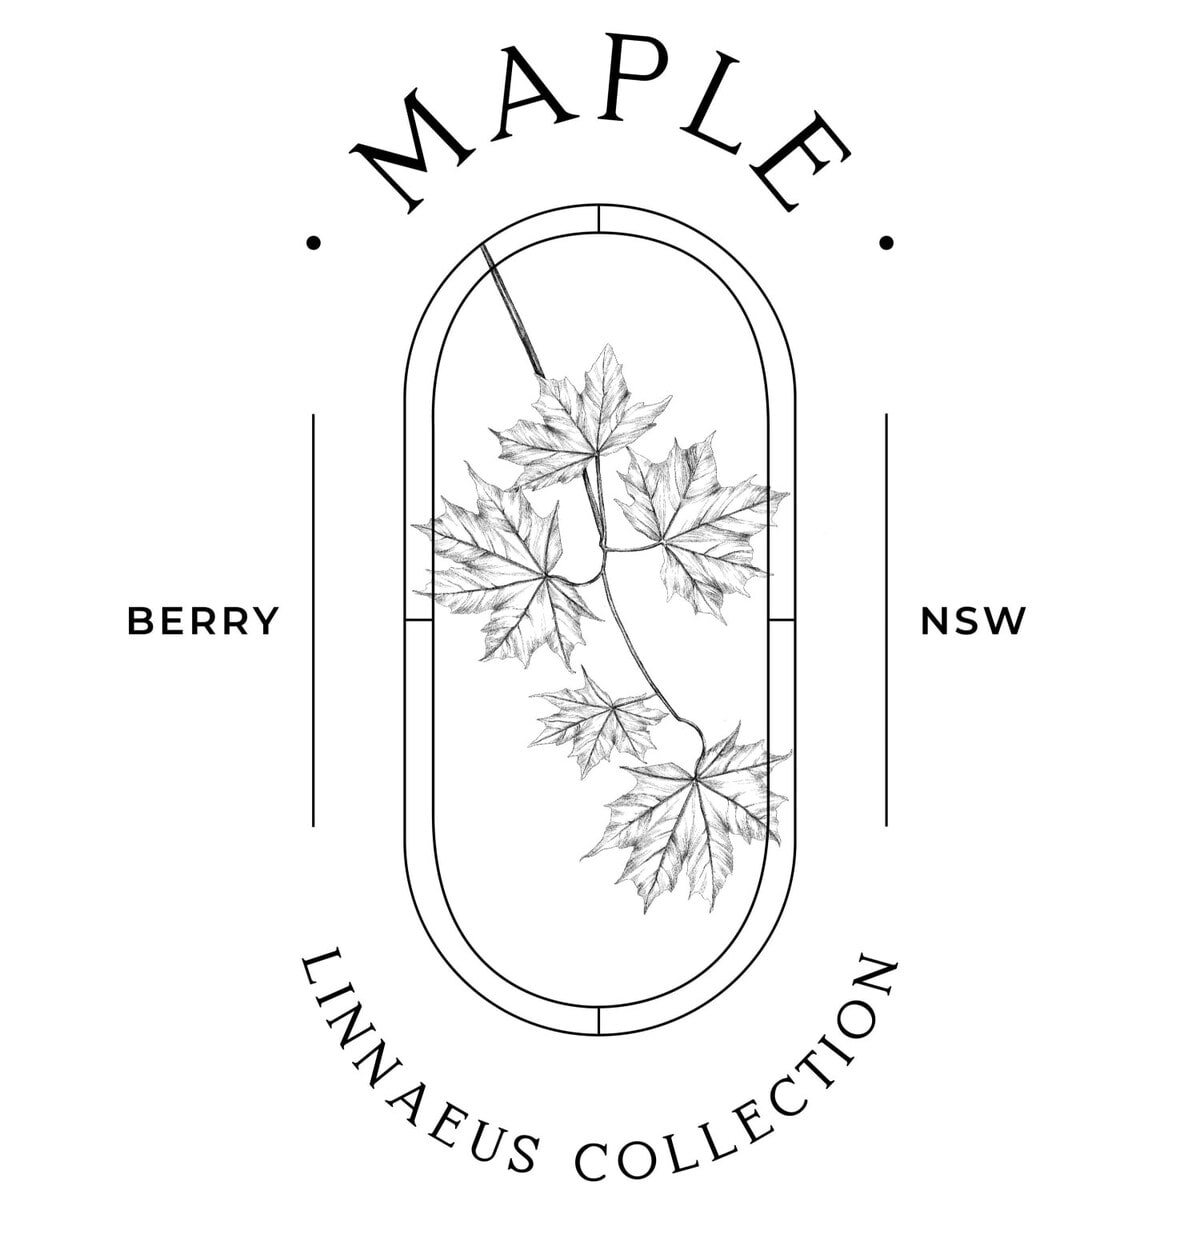 Property Image 2 - Maple on Albert, Berry - by Linnaeus Collection